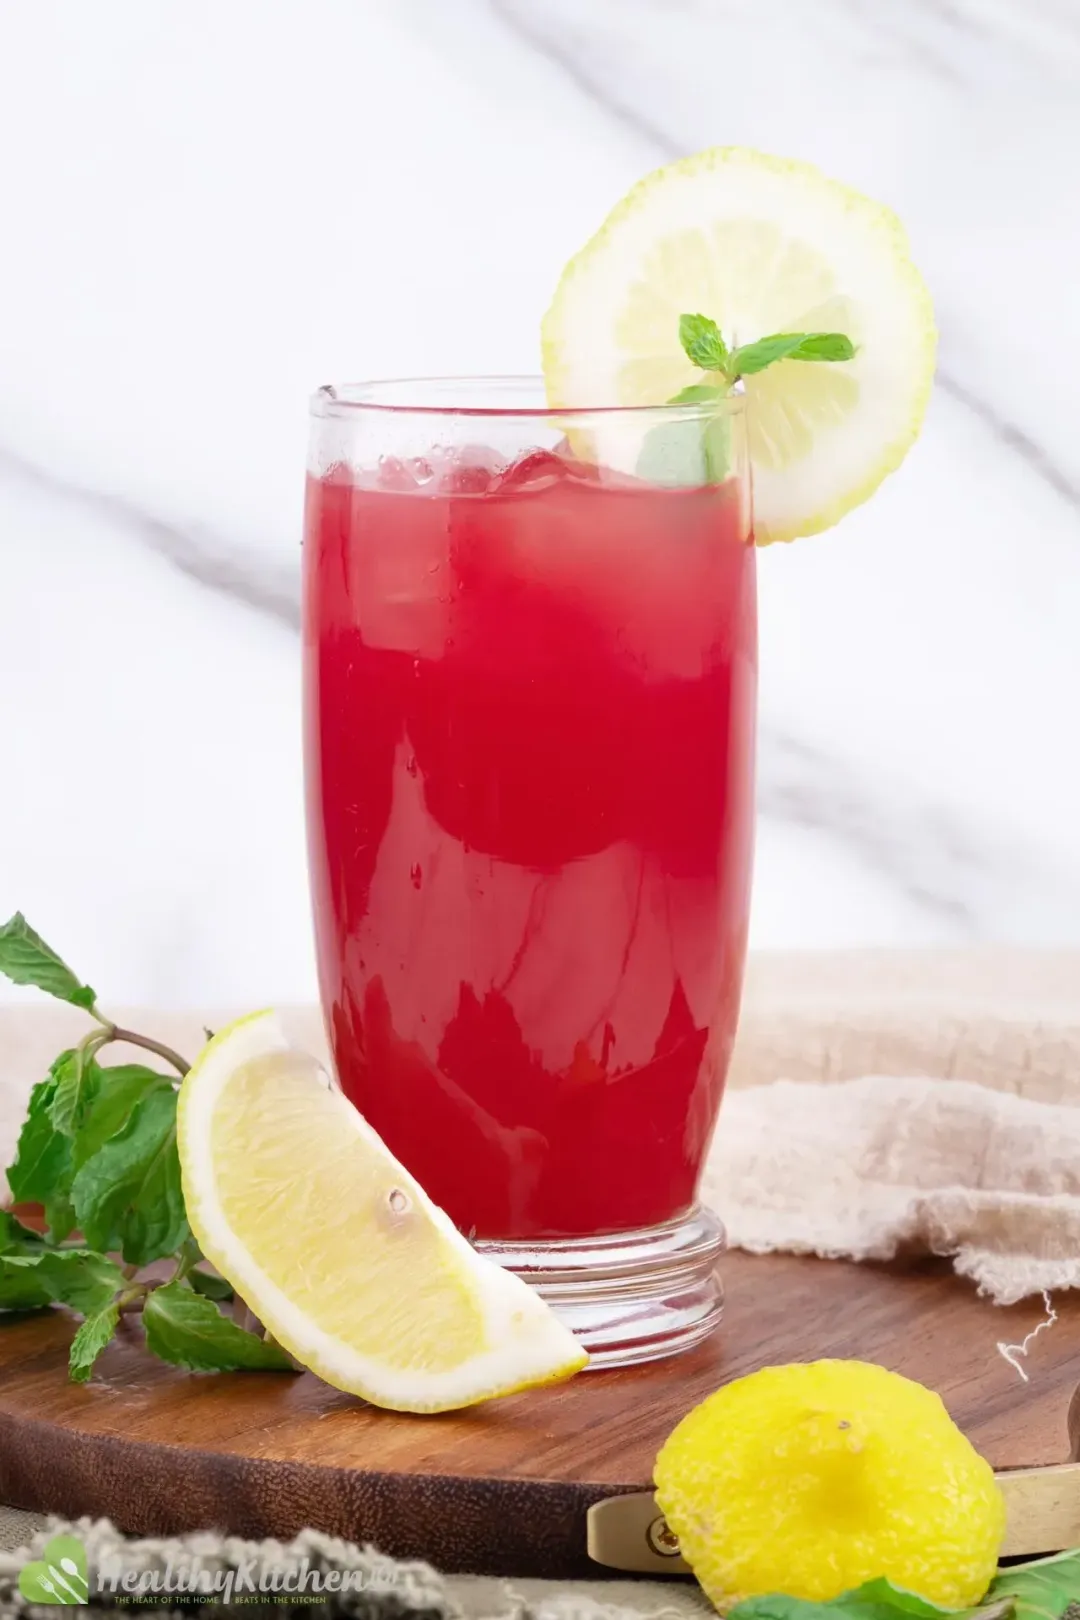 A glass of watermelon juice and lemon with a slice of lemon and a mint leaf placed on the rim surrounded by some fresh mint leaves and wedges of lemon on a wooden tray.